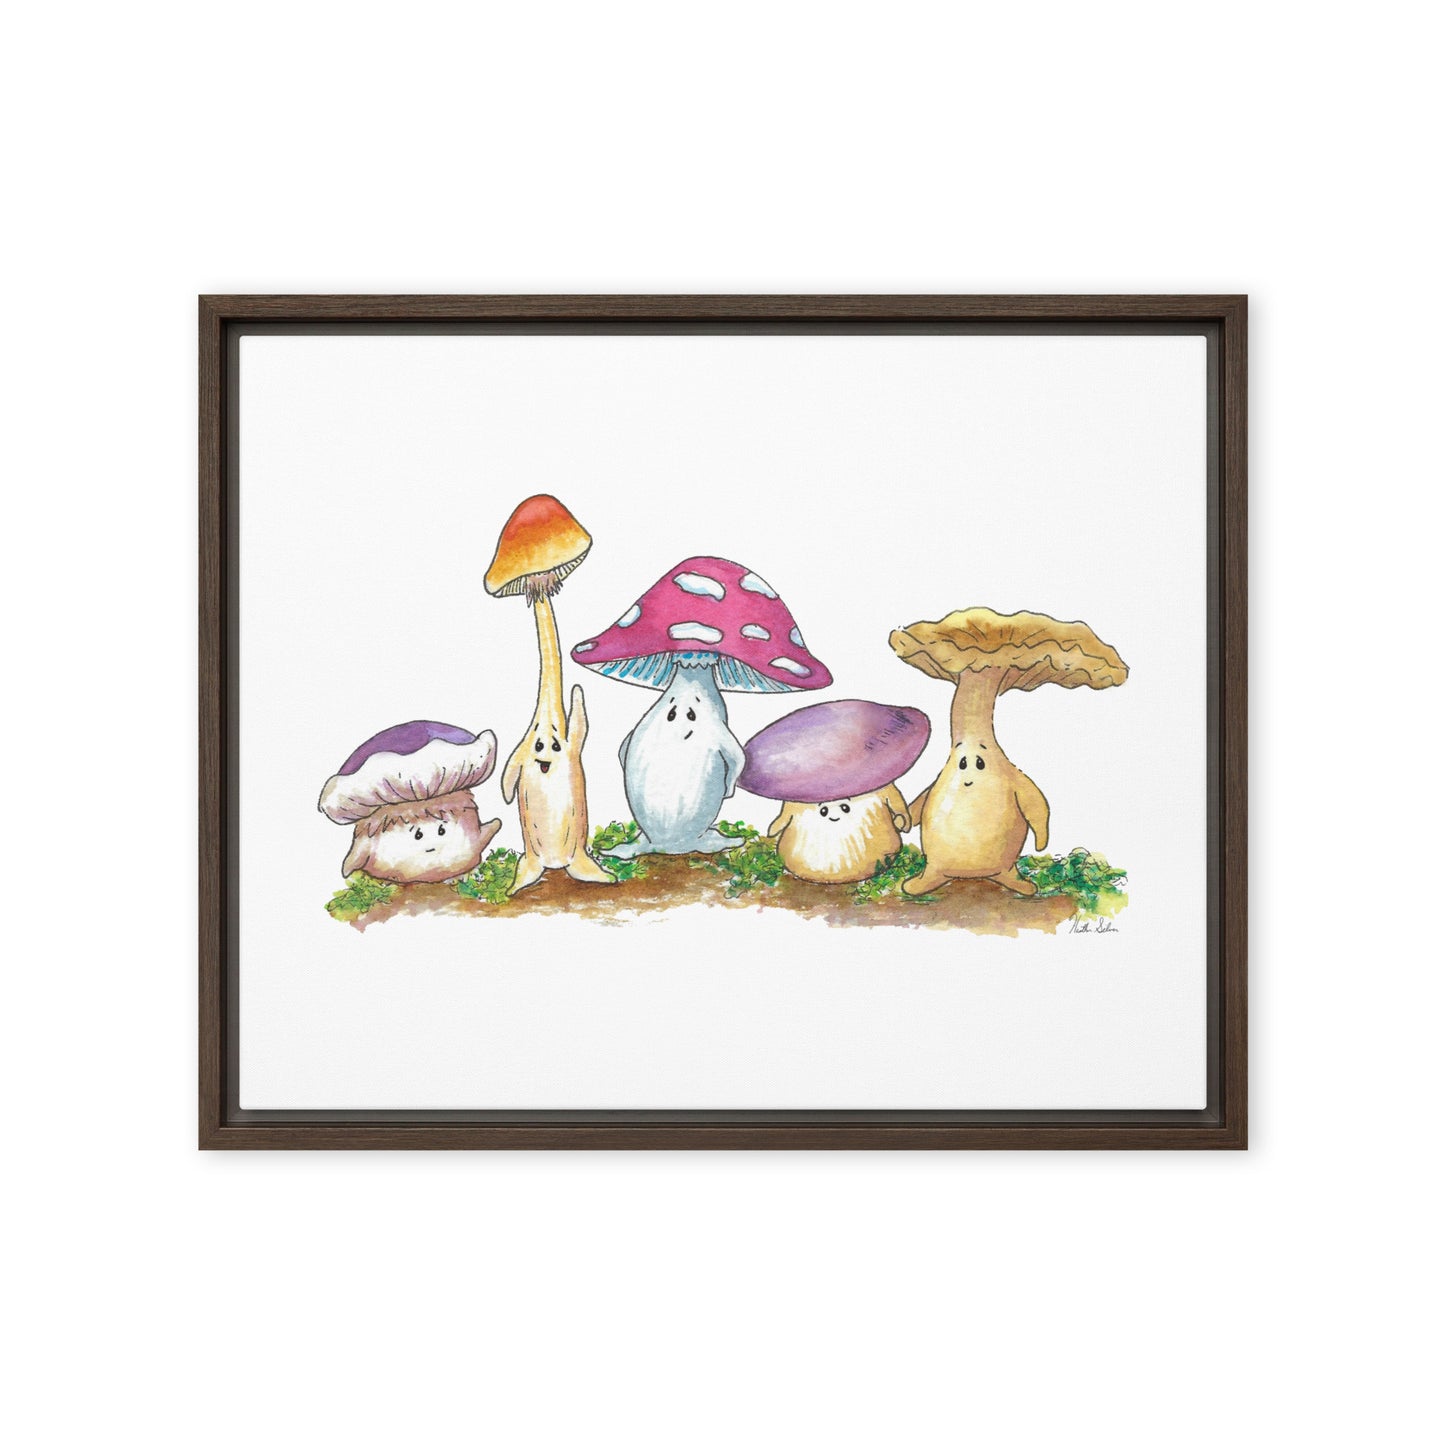 16 by 20 inch canvas print of Heather Silver's watercolor painting, Mushy and Friends. Framed in a dark brown pine wood frame that gives it a floating canvas effect.